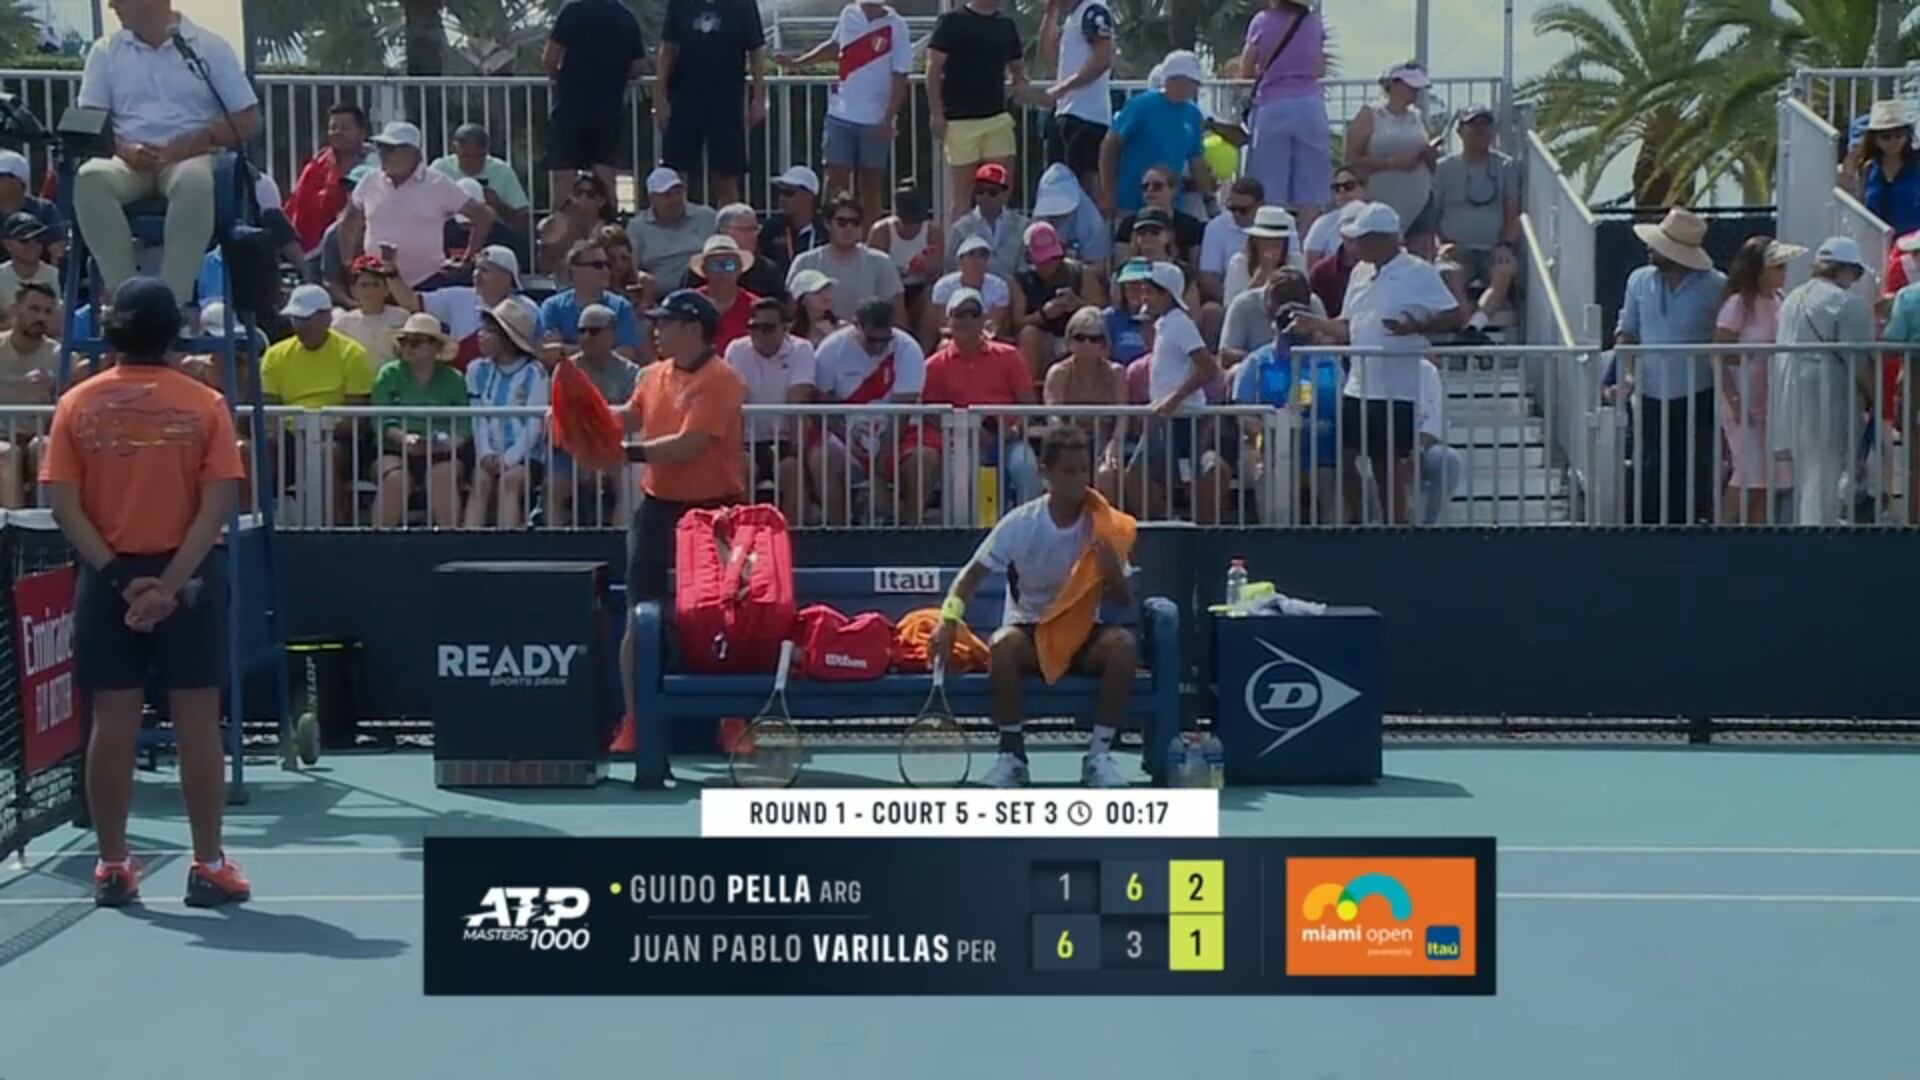 Juan Pablo Varillas won the first set, but lost the second.